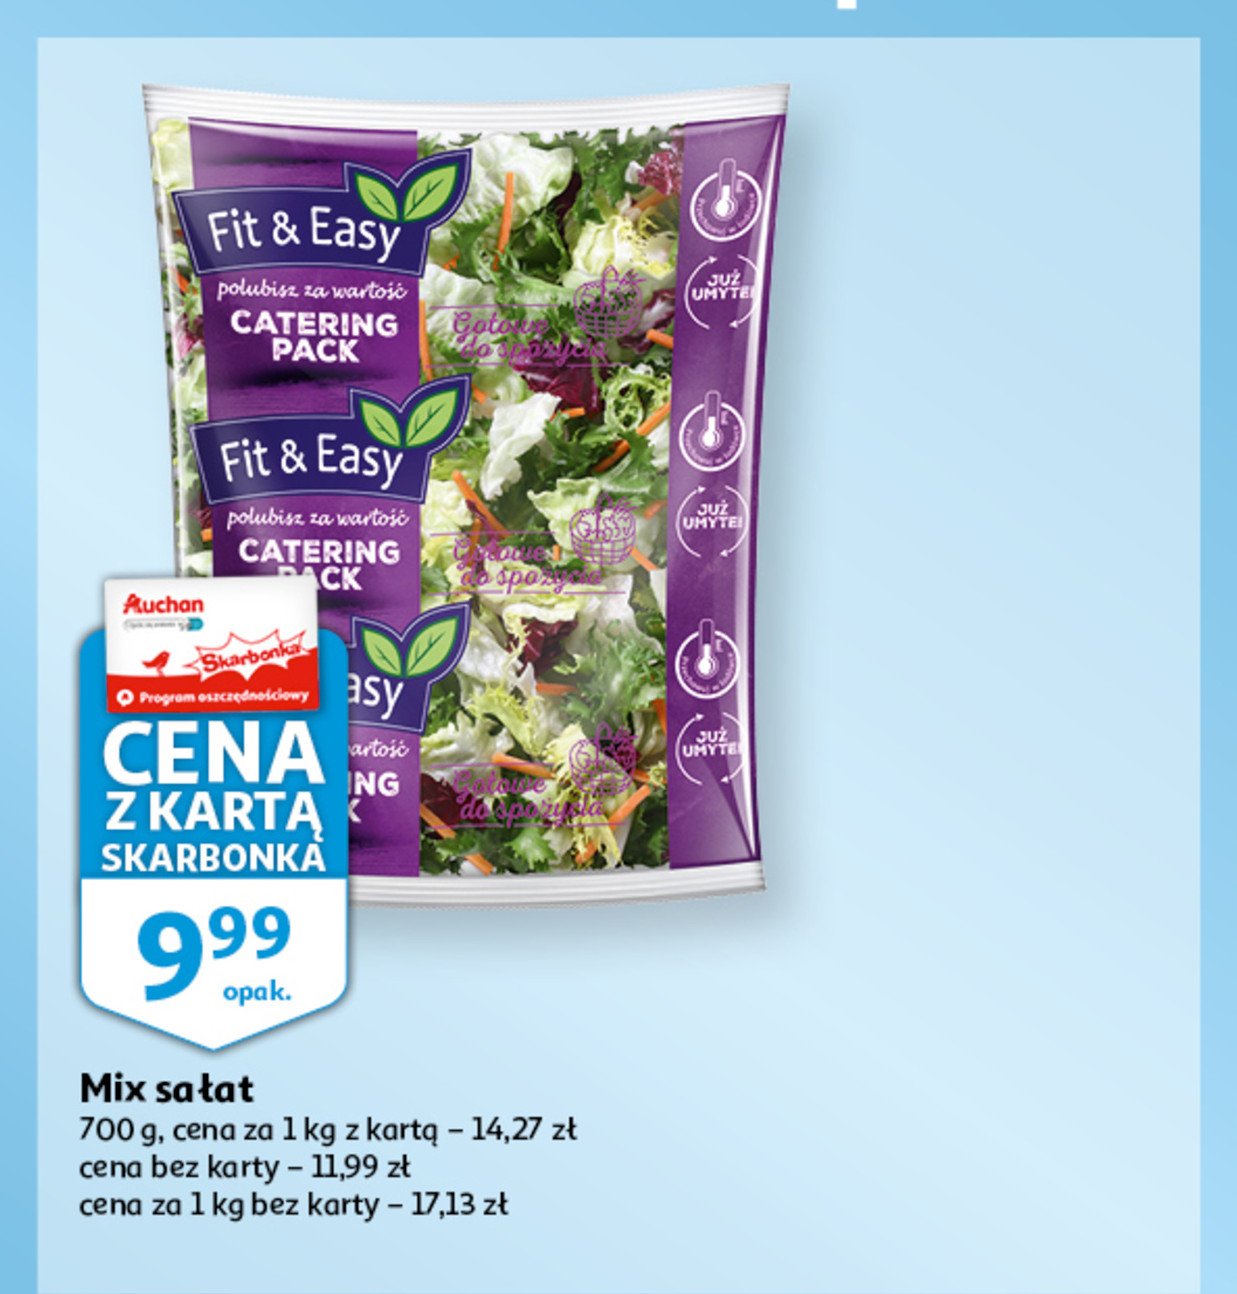 Sałata catering pack Fit & easy promocja